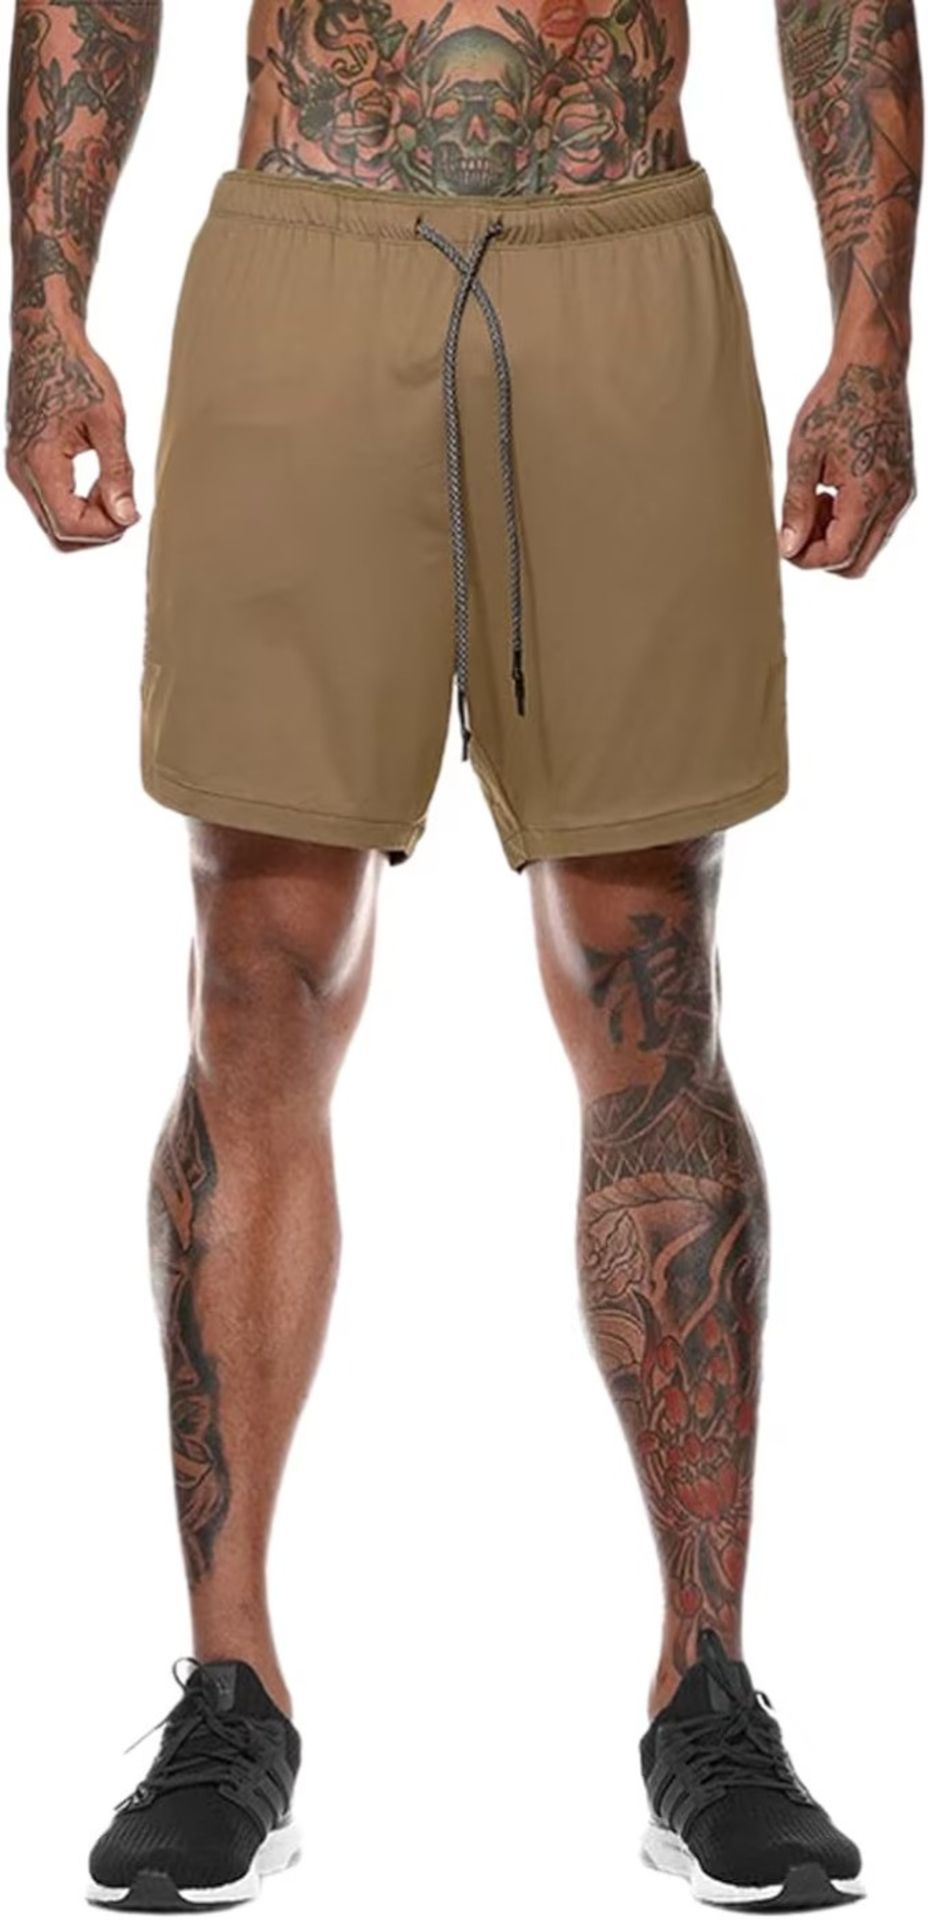 [NEW] Men's Workout Gym Shorts 2-in-1 Running Shorts Training Short with Inner Compres